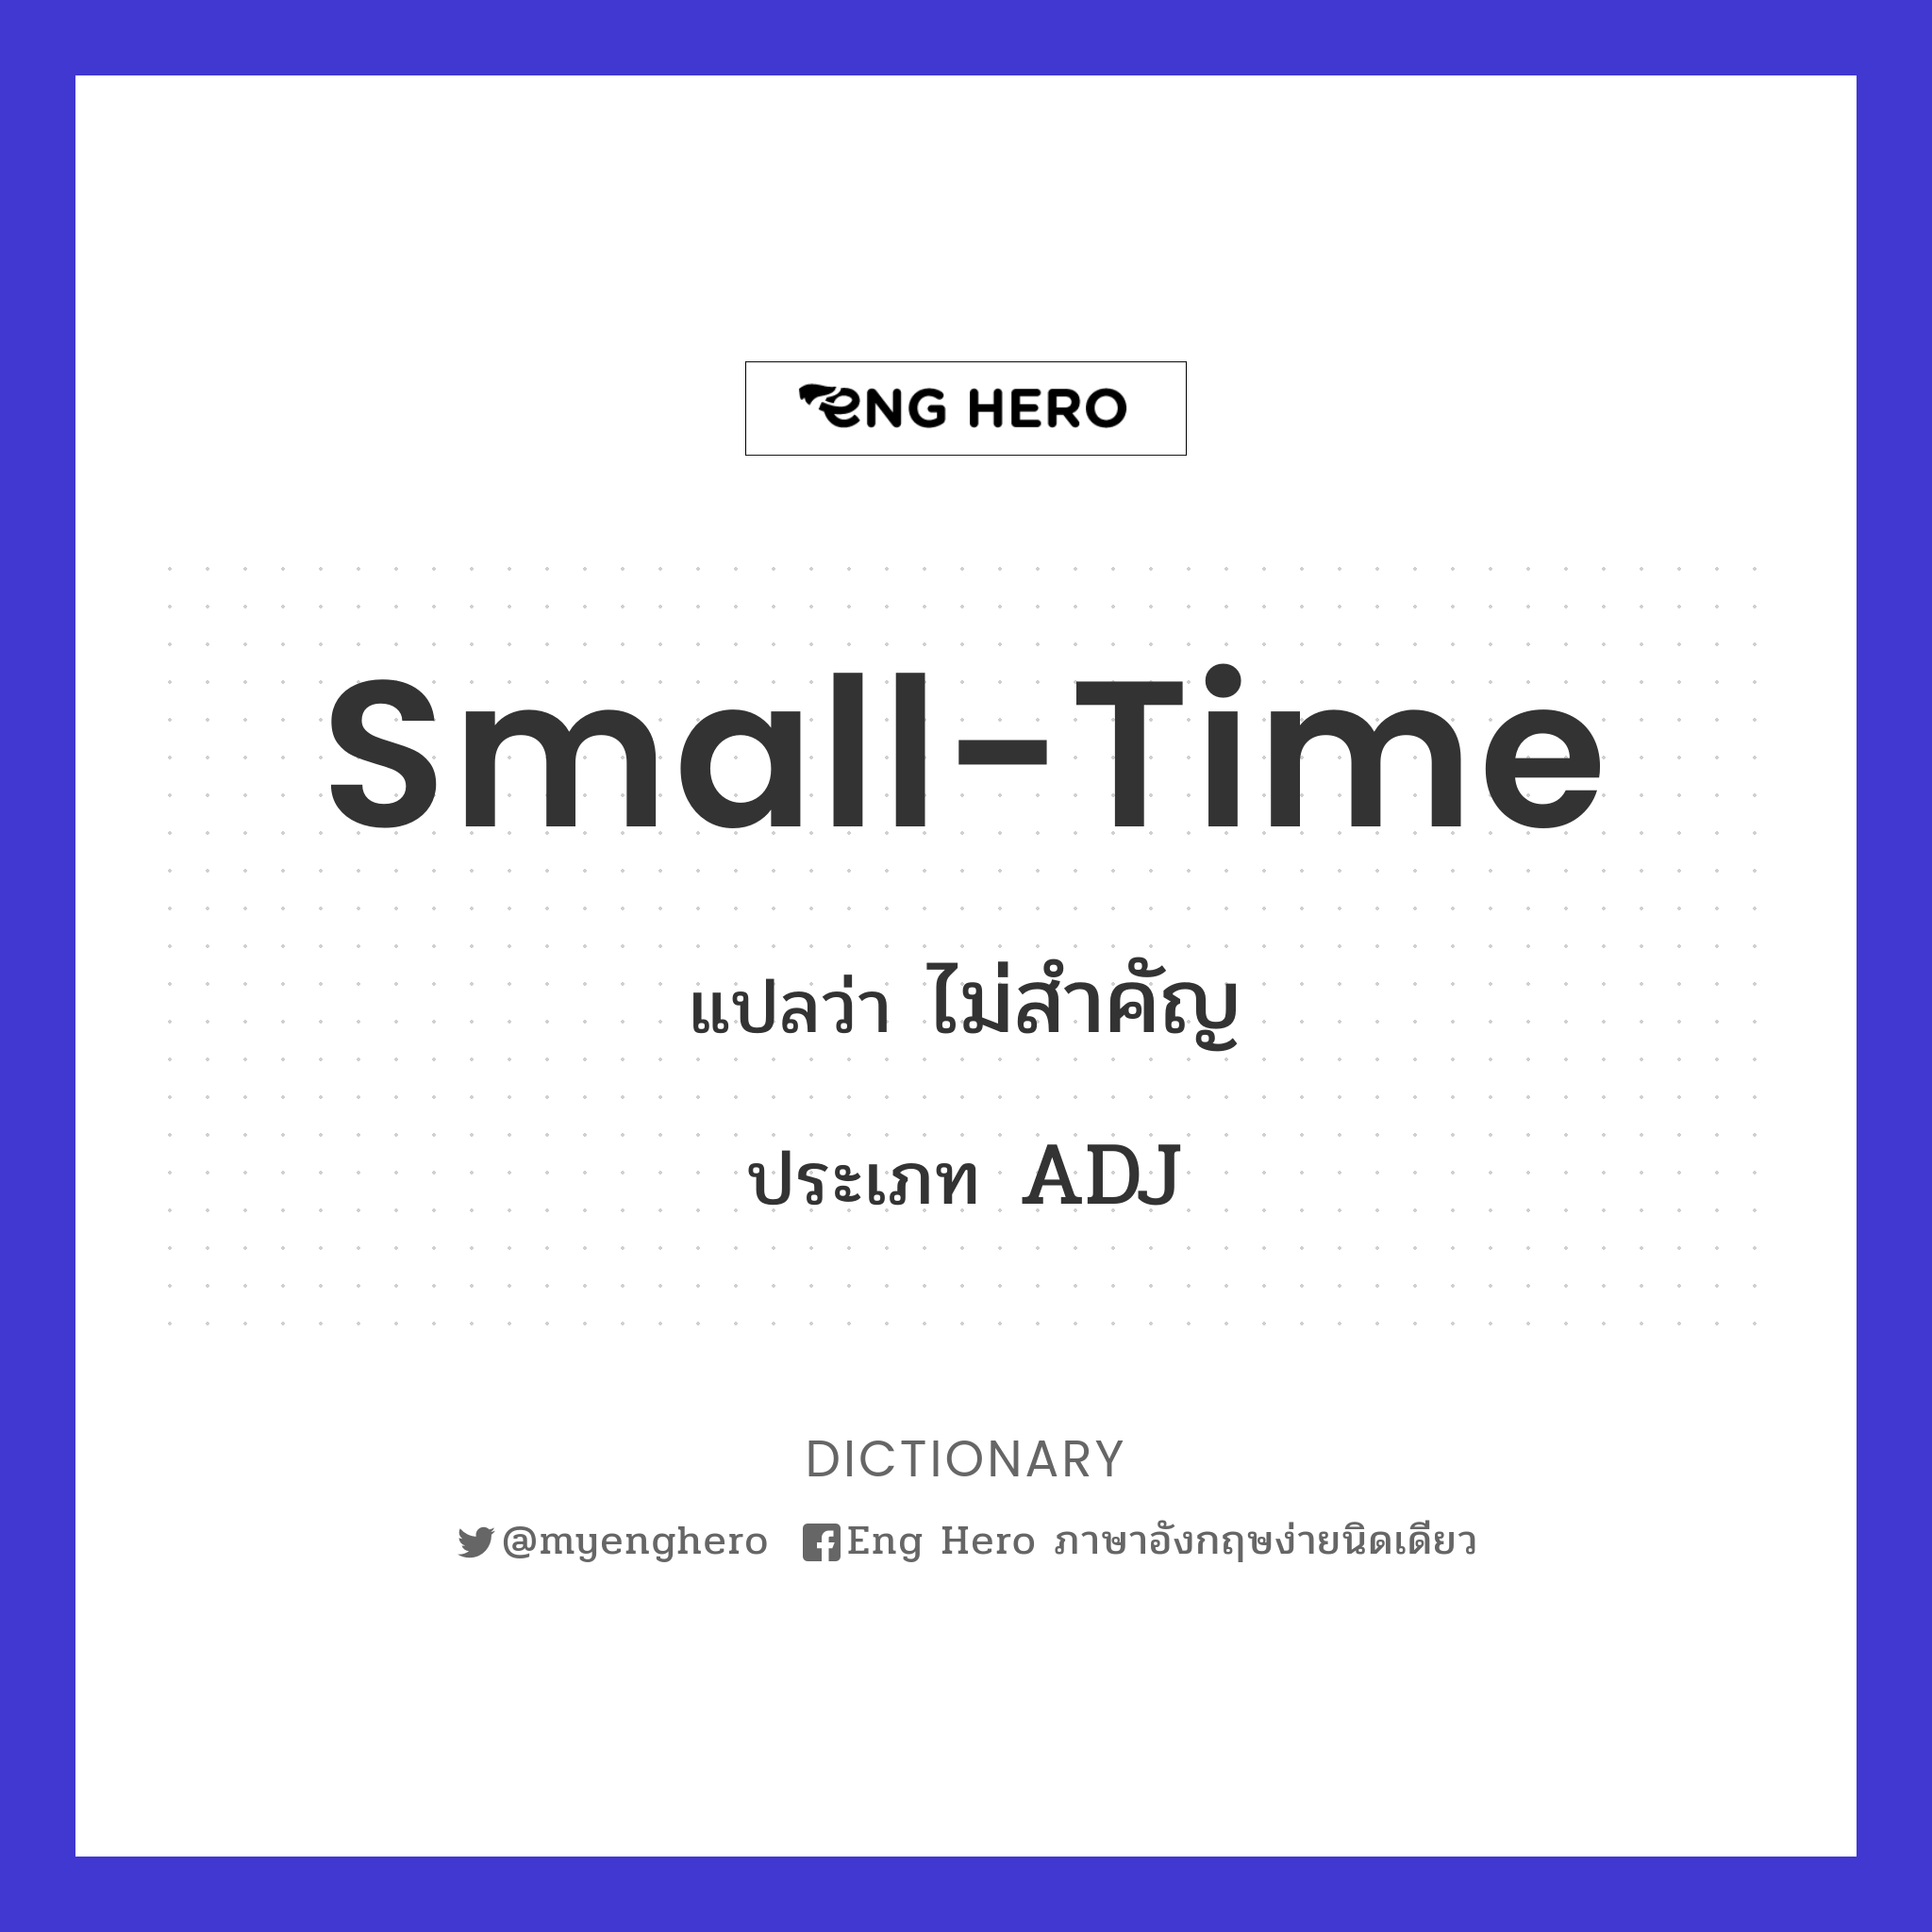 small-time